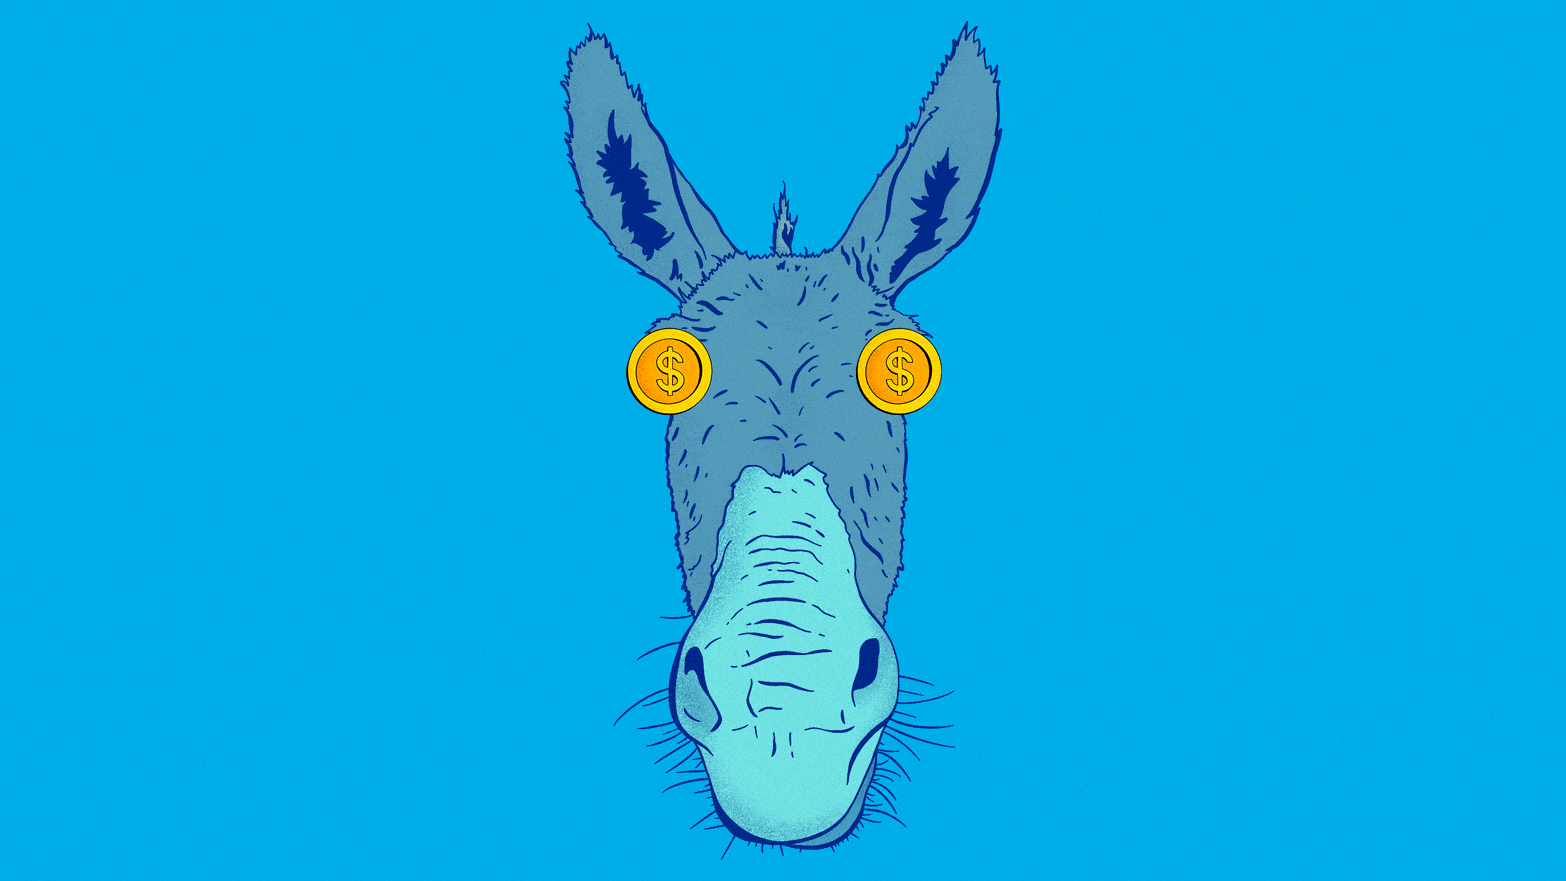 Illustrative gif of a blue donkey with gold coins rotating on the eyes on a blue background.